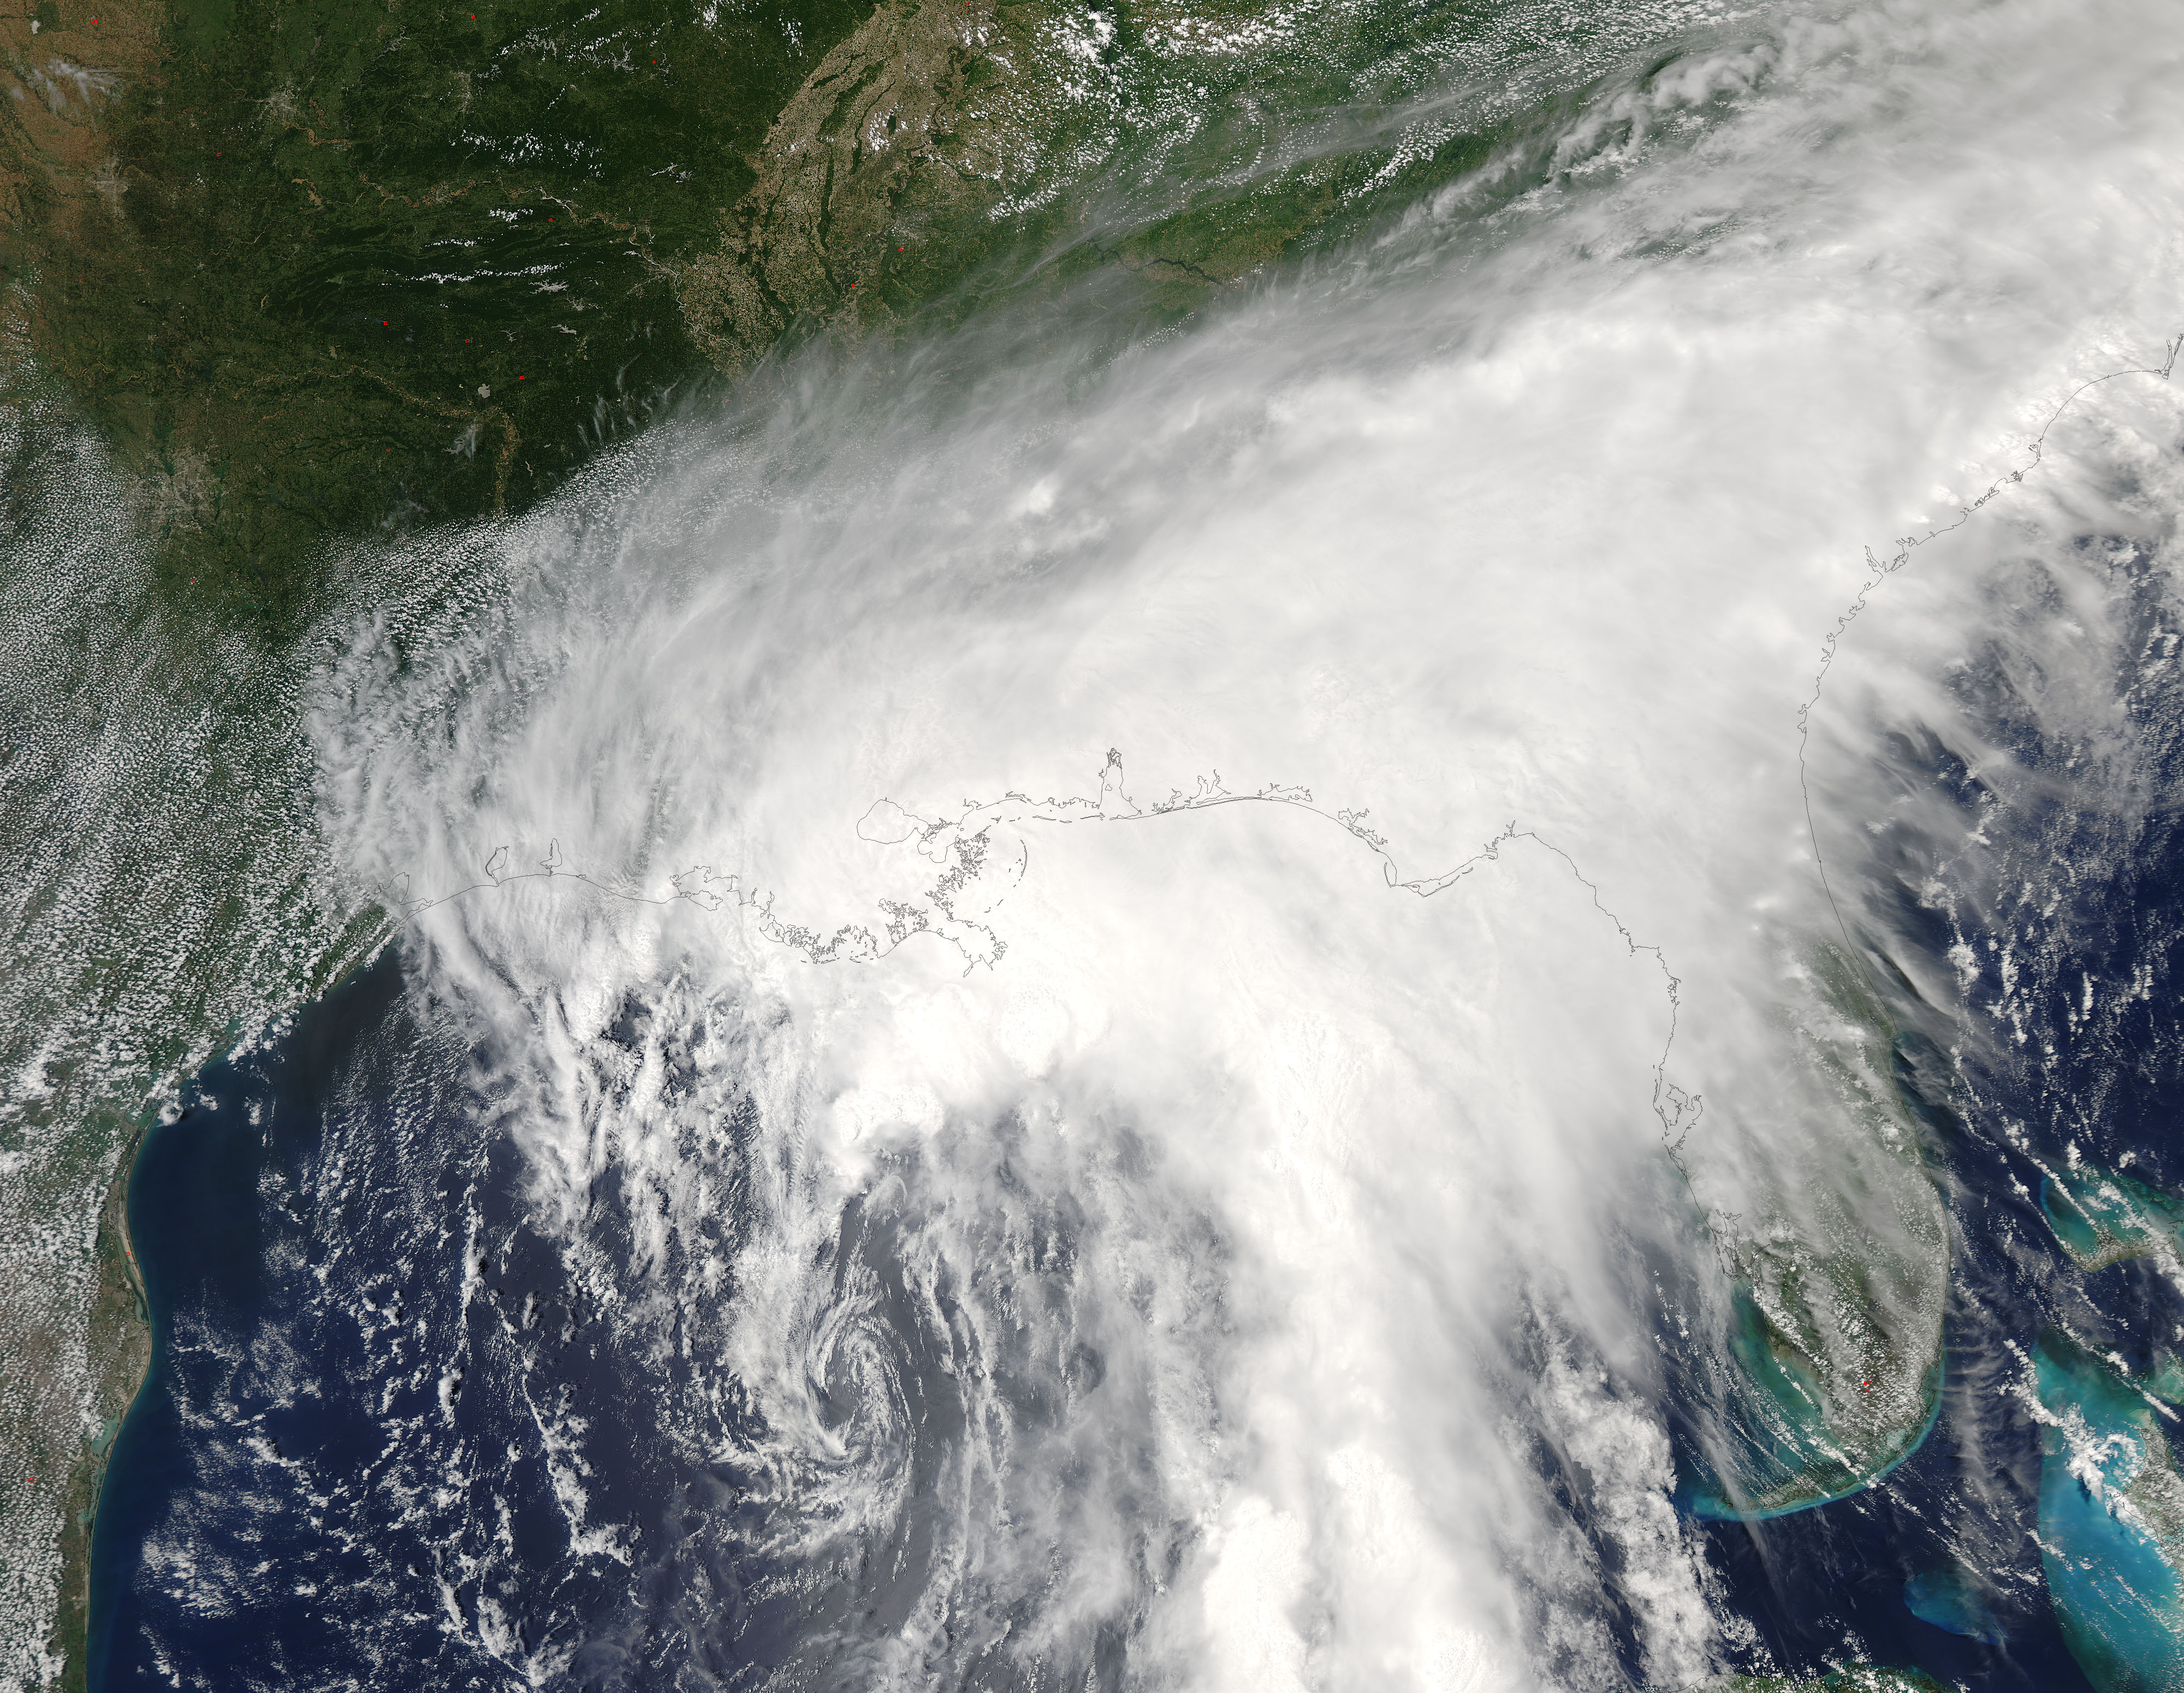 Tropical Storm Cindy (03L) over southeastern United States - related image preview